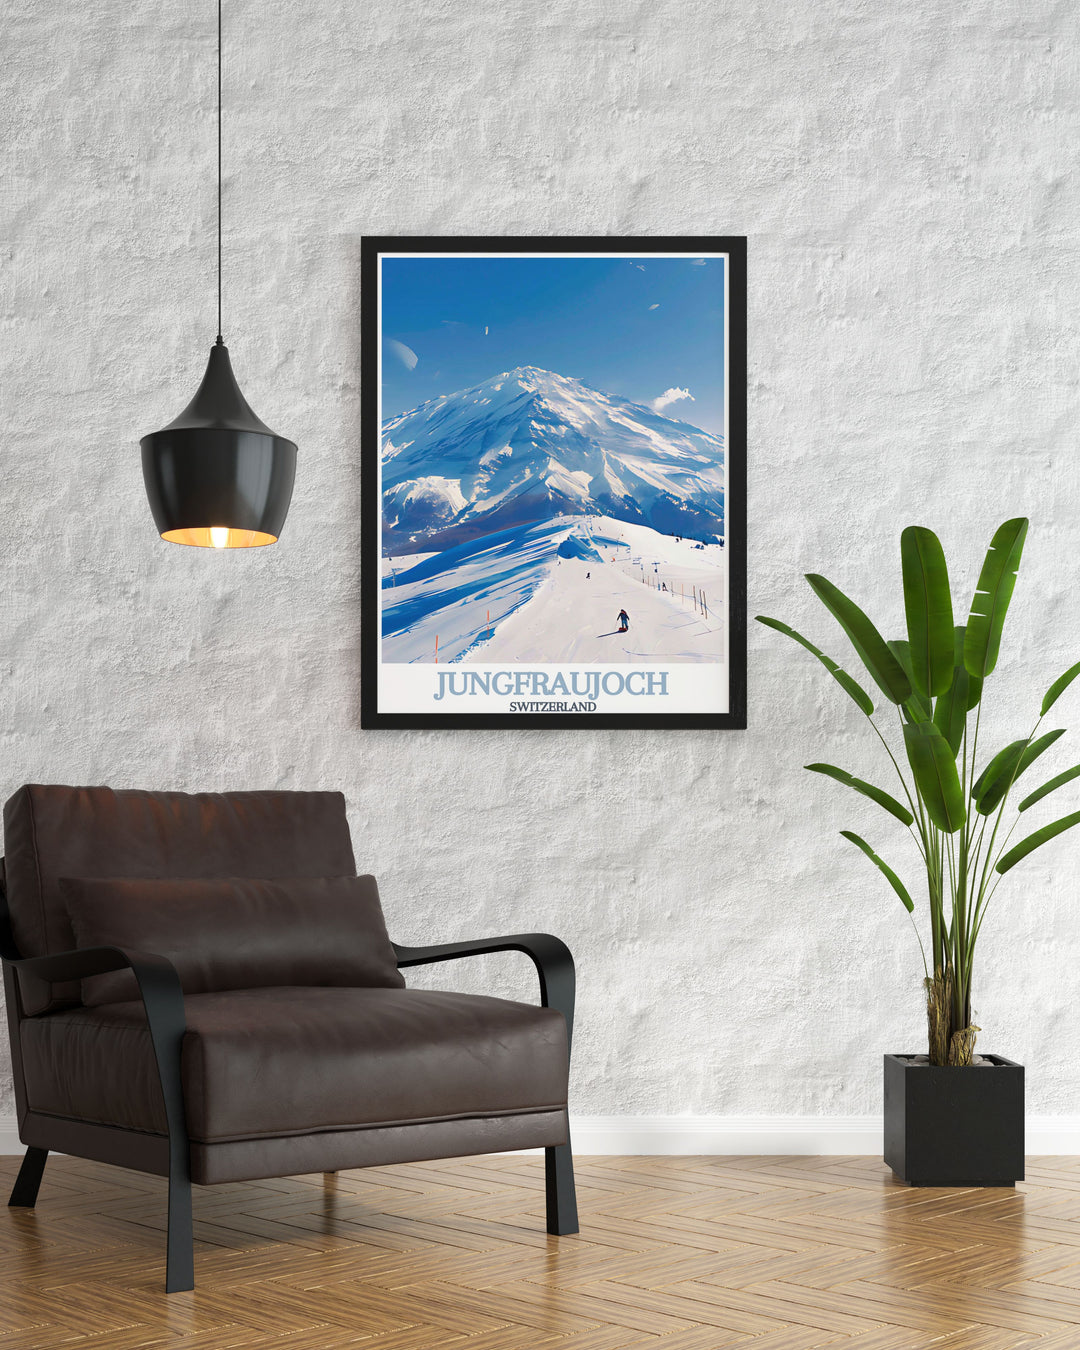 Capturing the stunning views from Jungfraujoch, this detailed print highlights the beauty of the Bernese Alps and the thrilling journey through the mountains, perfect for inspiring wanderlust.